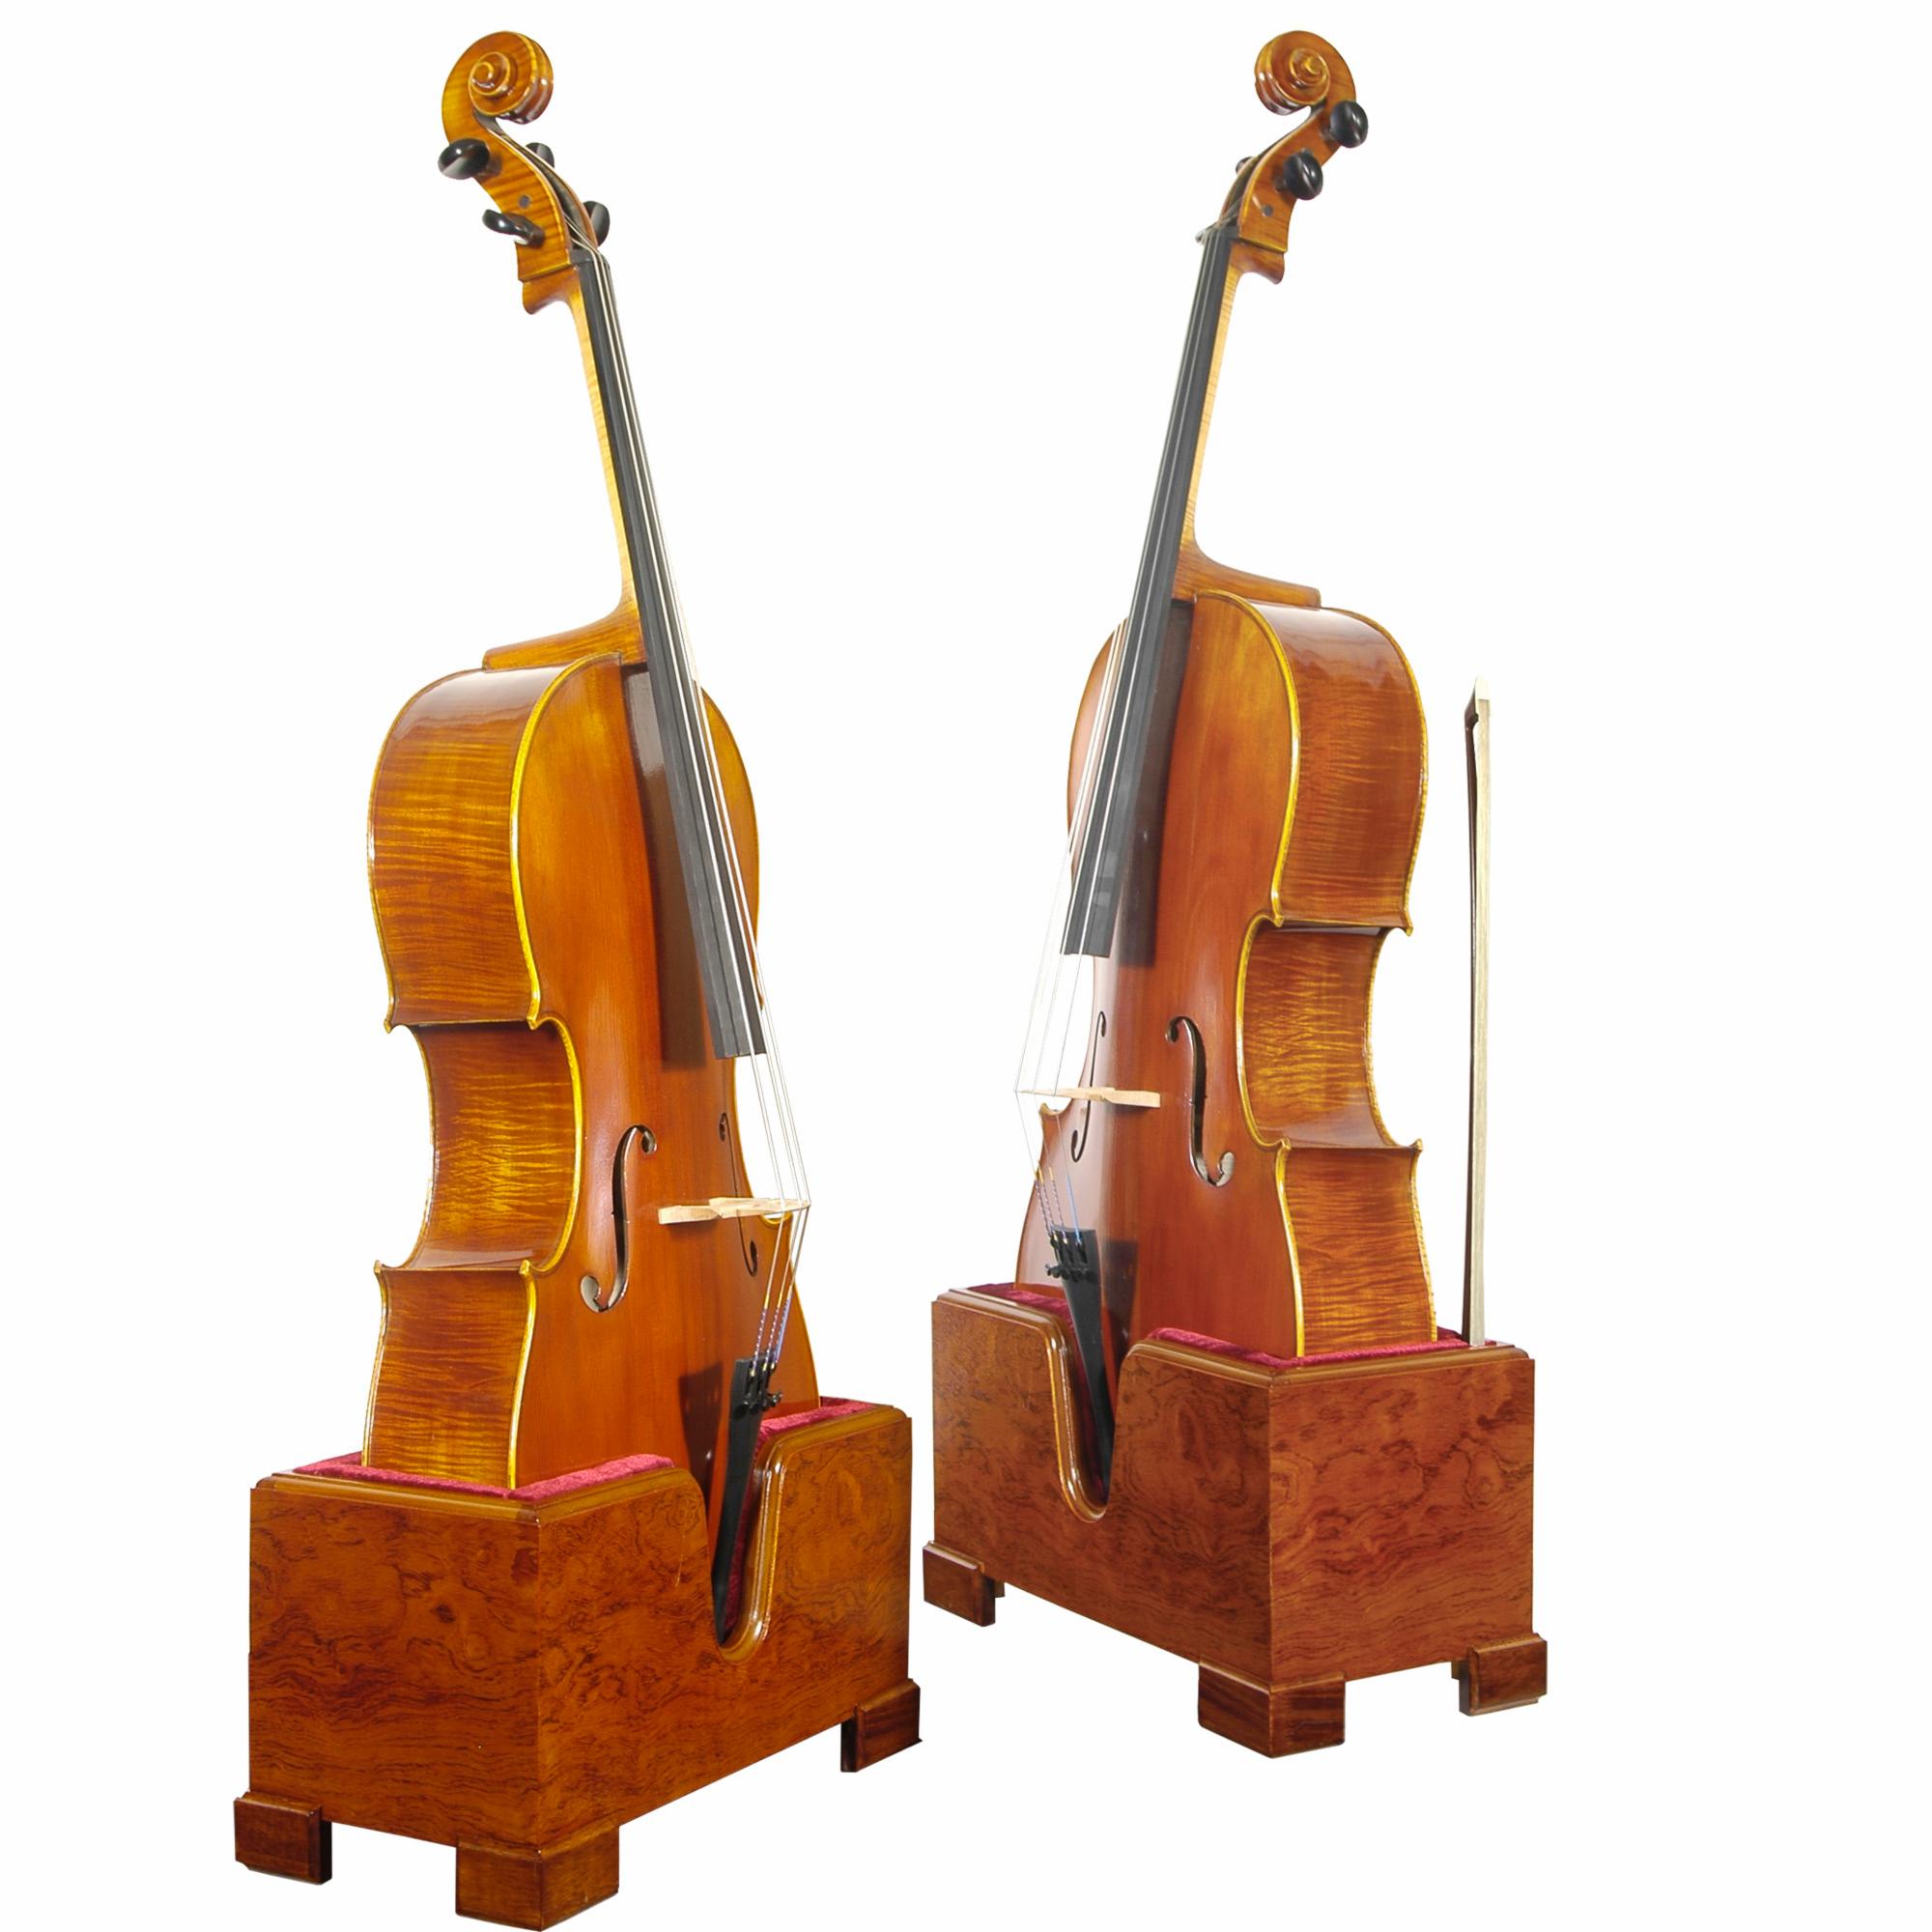 Southwest Strings Cello Cradle Instrument Stand